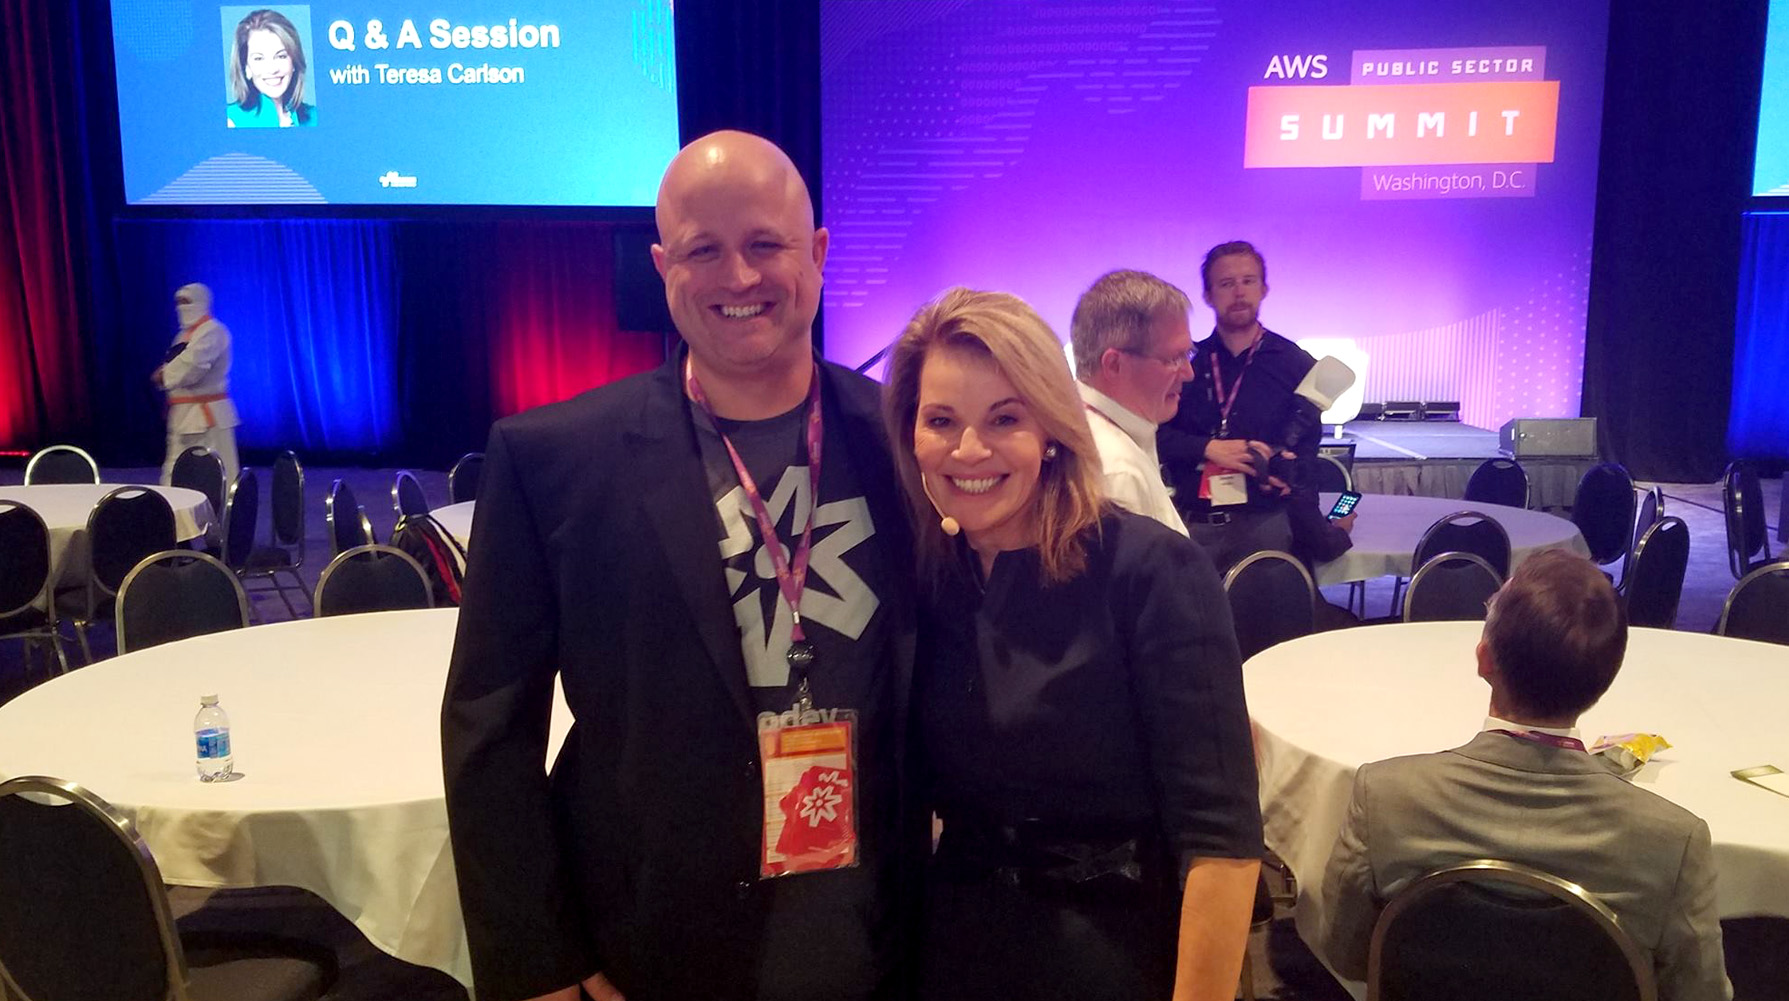 Solodev CEO, Shawn Moore and previous AWS Vice President, Teresa Carlson at the AWS Public Sector Summit